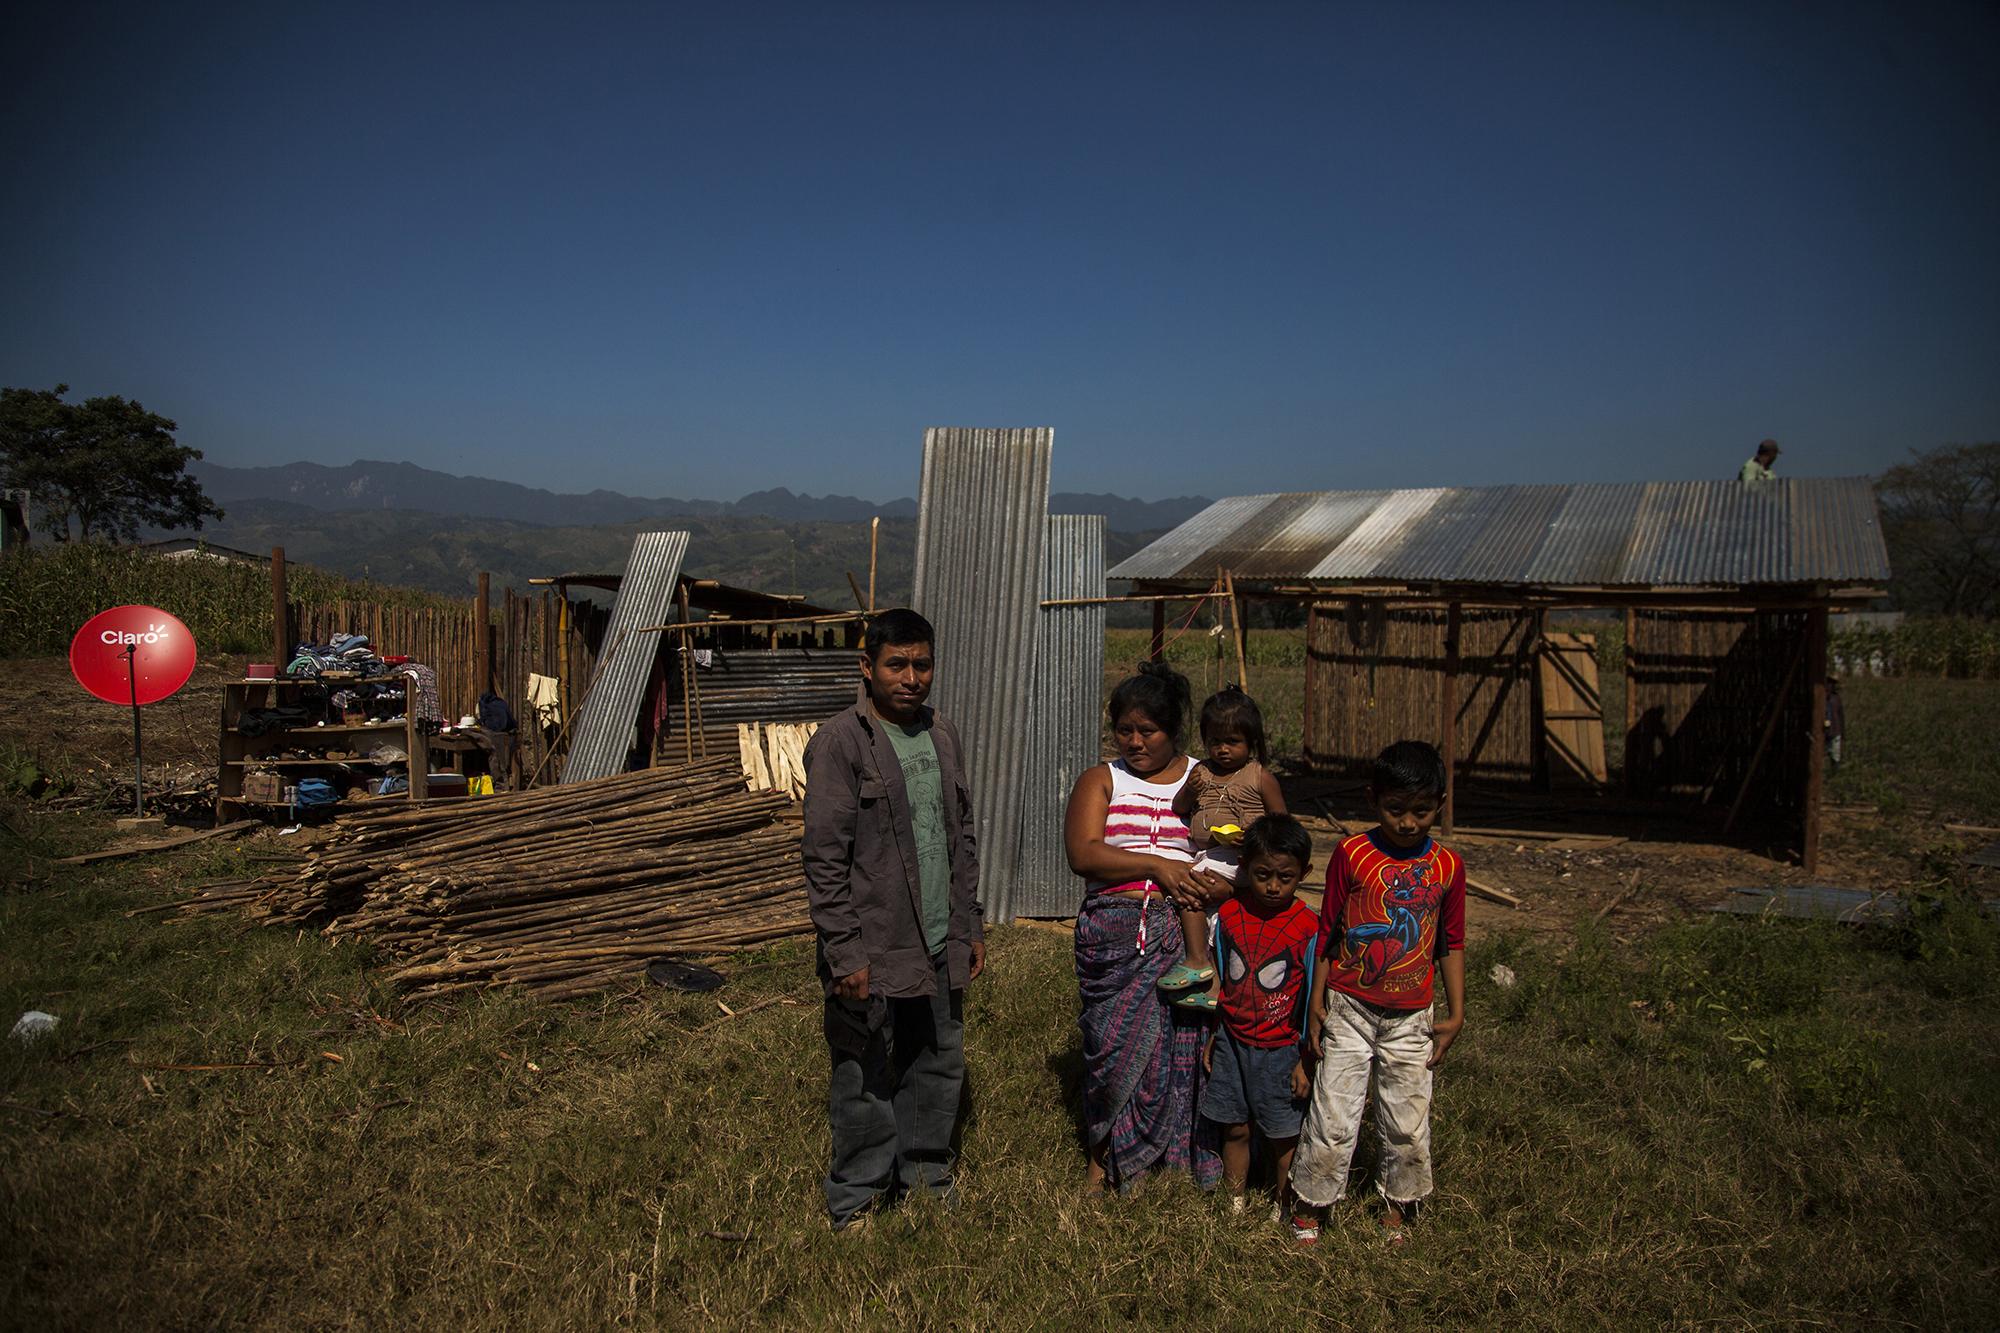 The Valle del Polochic is part of one of the most impoverished zones in Guatemala. There, parameters for prosperity are relative. José Luis Cux, 32 años, and his wife, Dominga Chen, 28, managed to build a house thanks to the savings they collected from the corn and bean crops that they sell. They say they